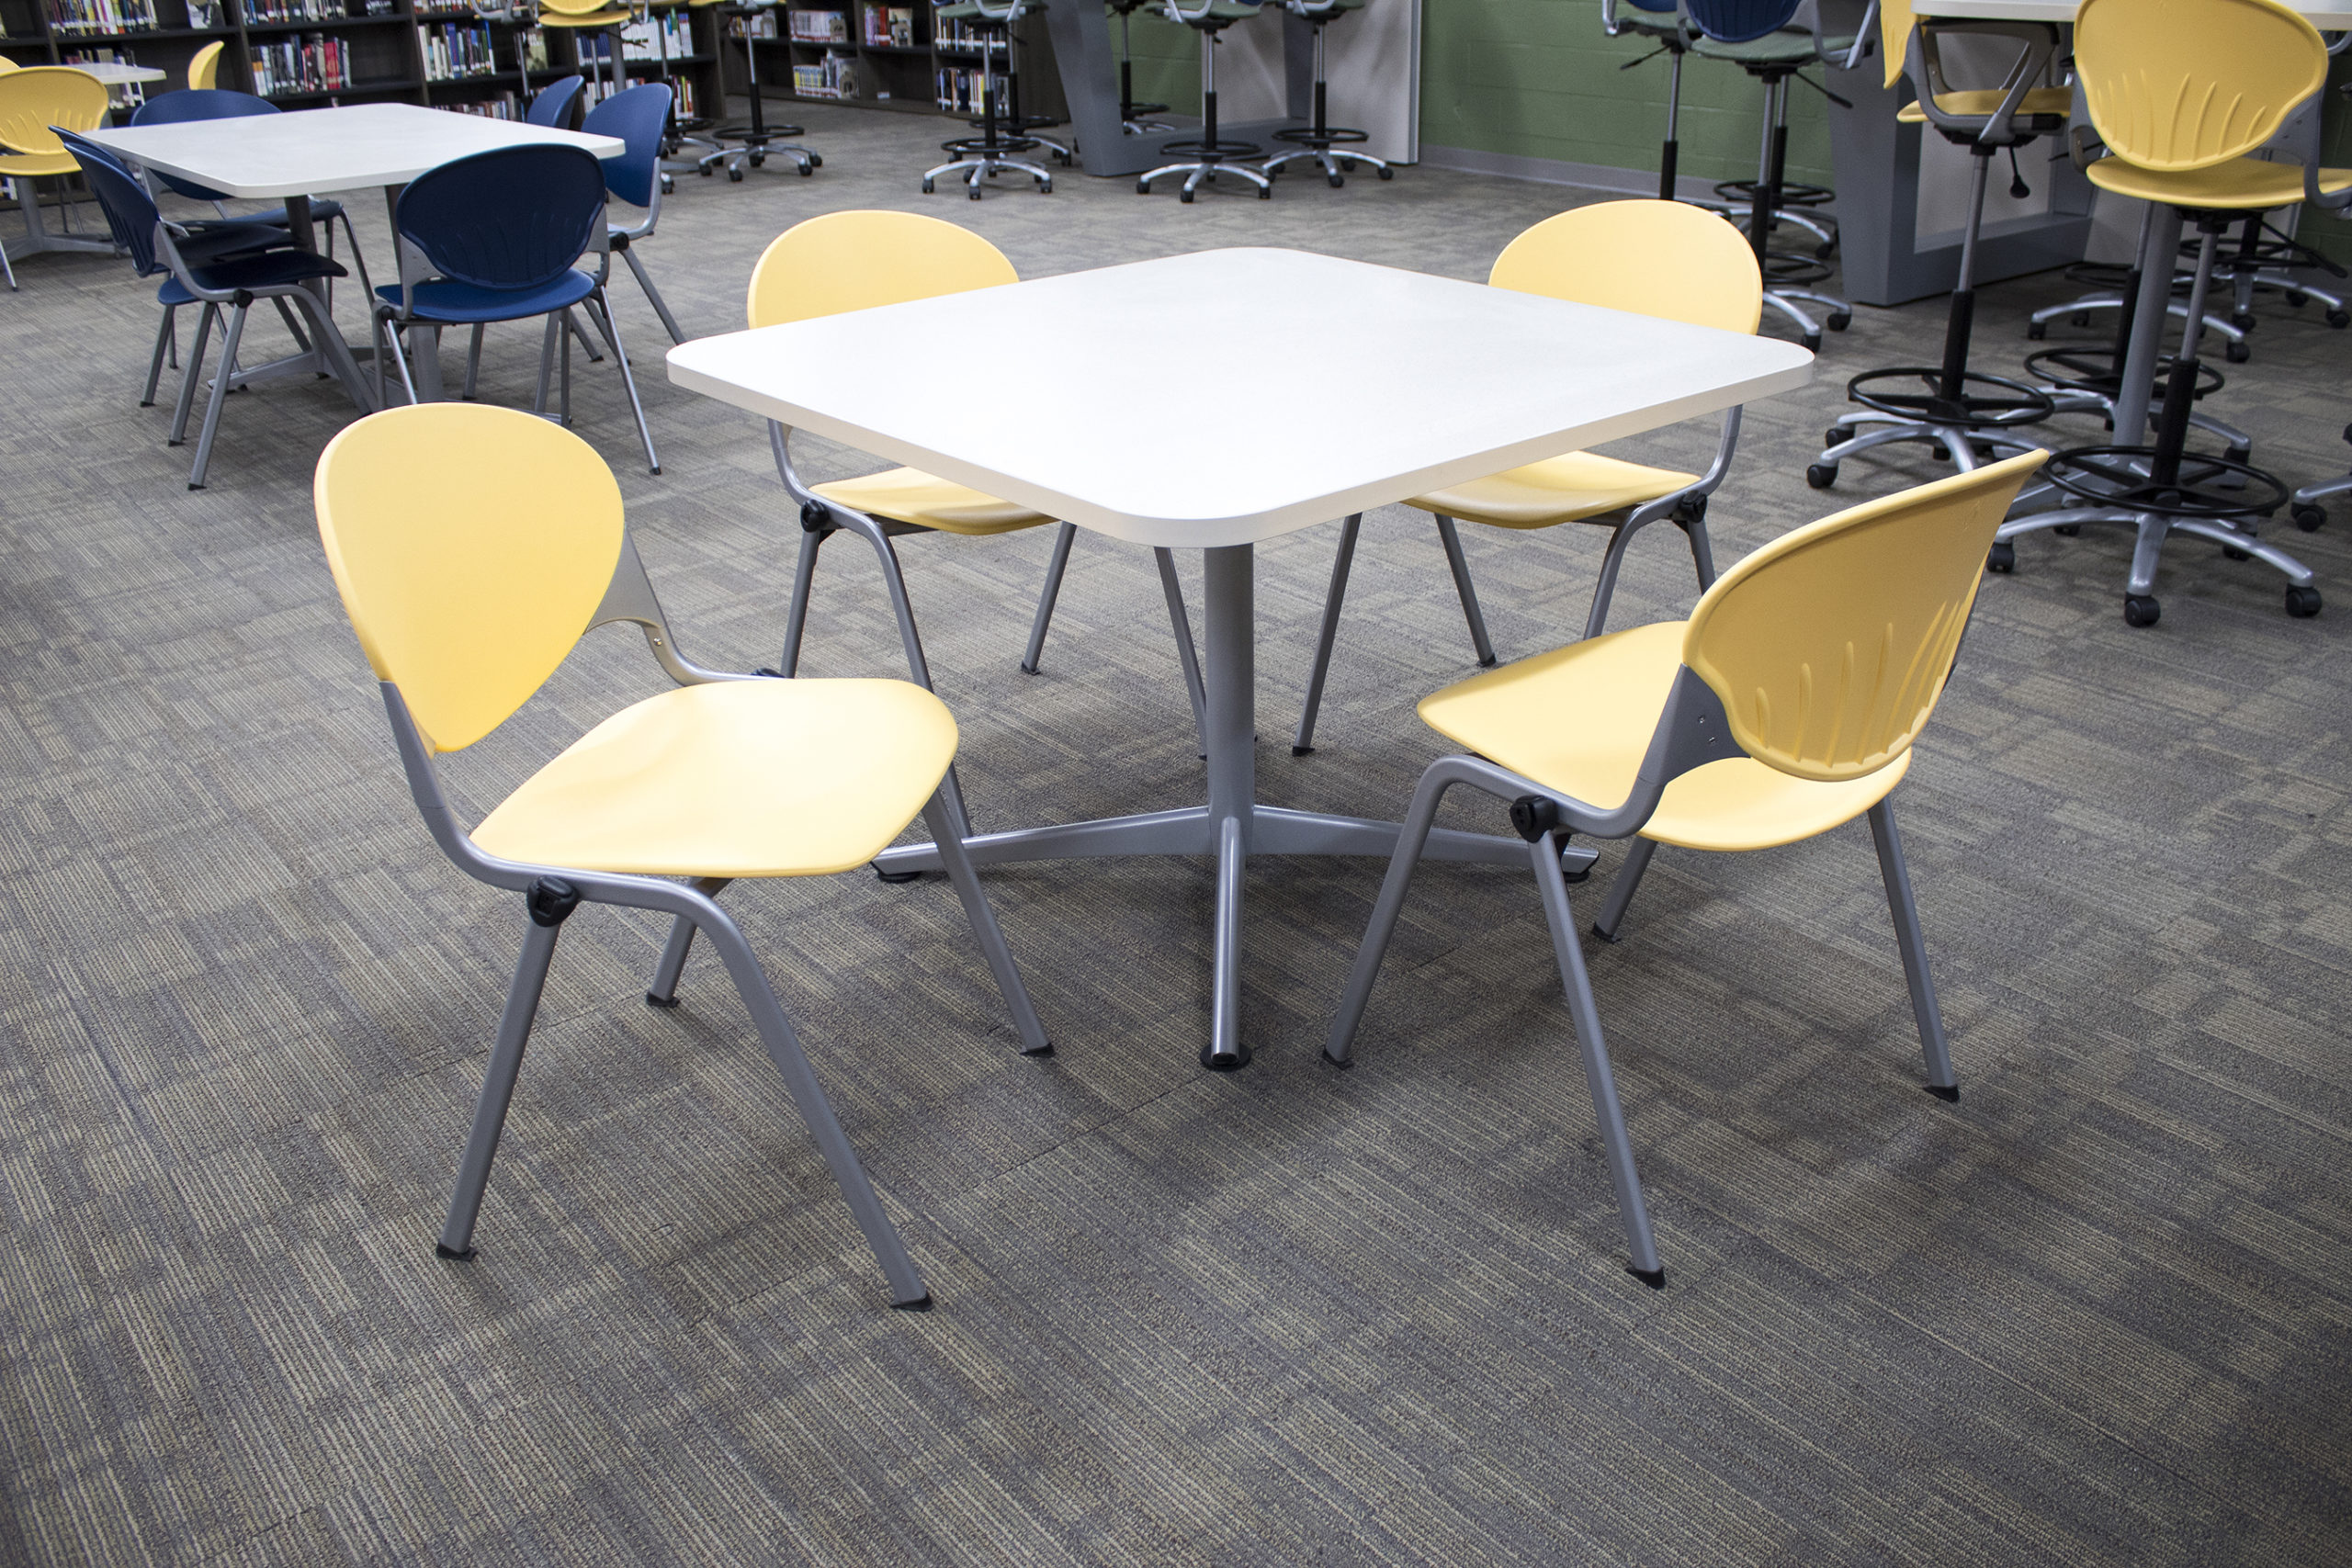 Footings Collaborative Table and Cinch Chairs - Copy